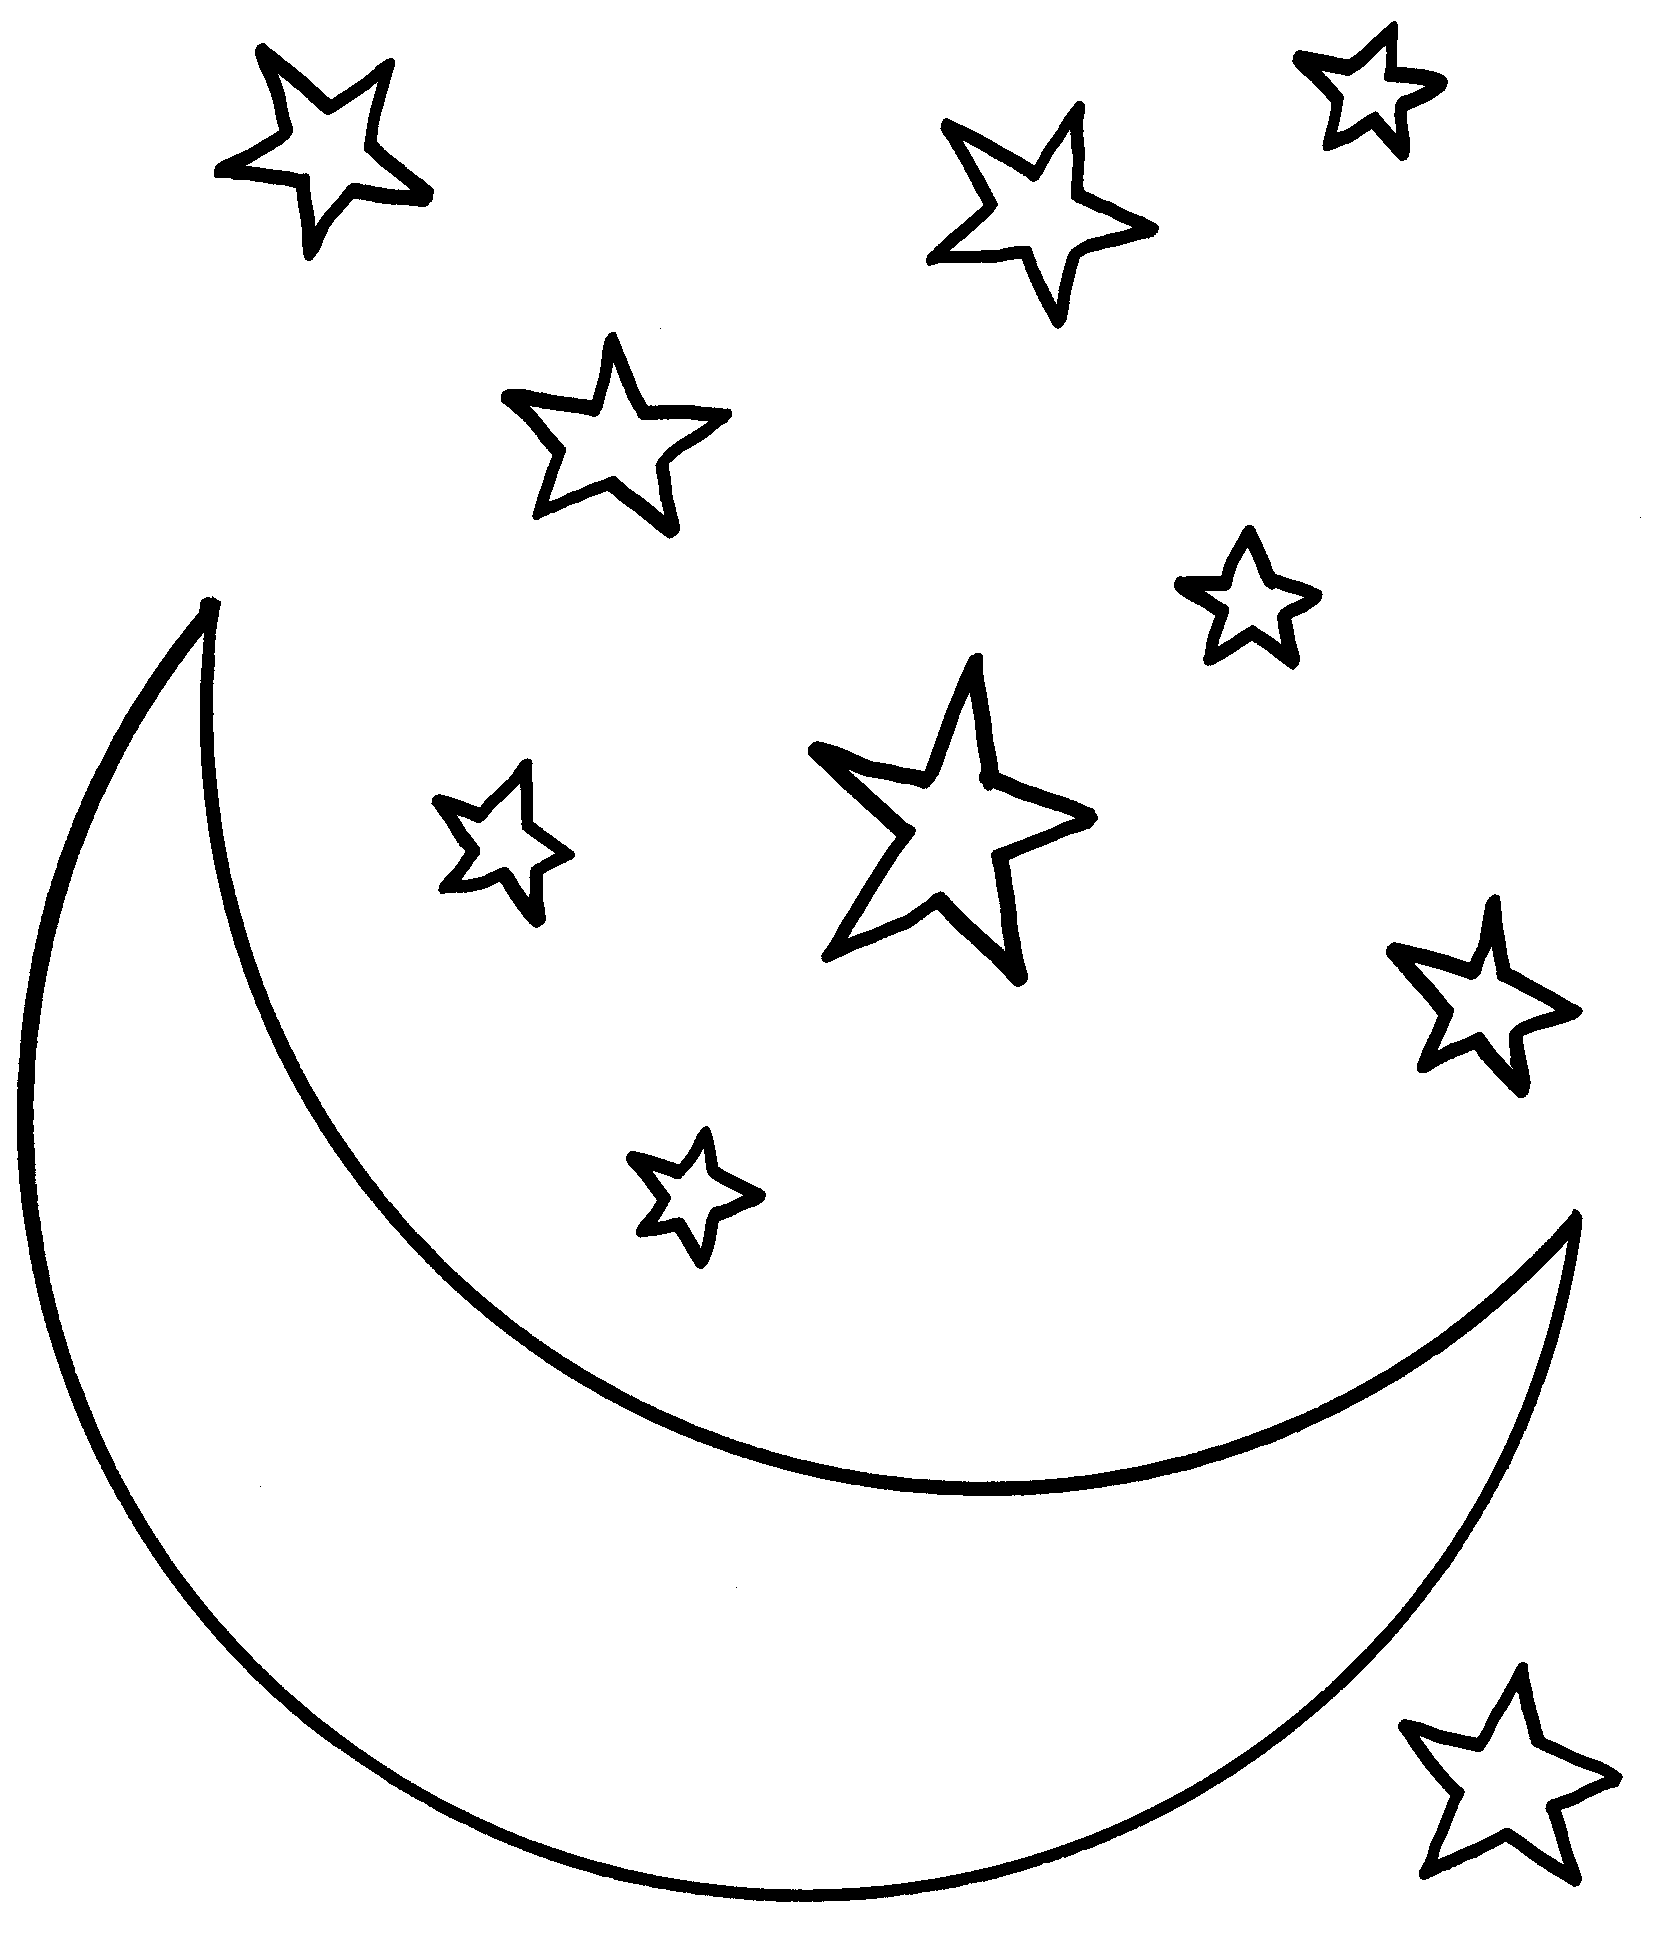 moon clipart black and white - photo #17